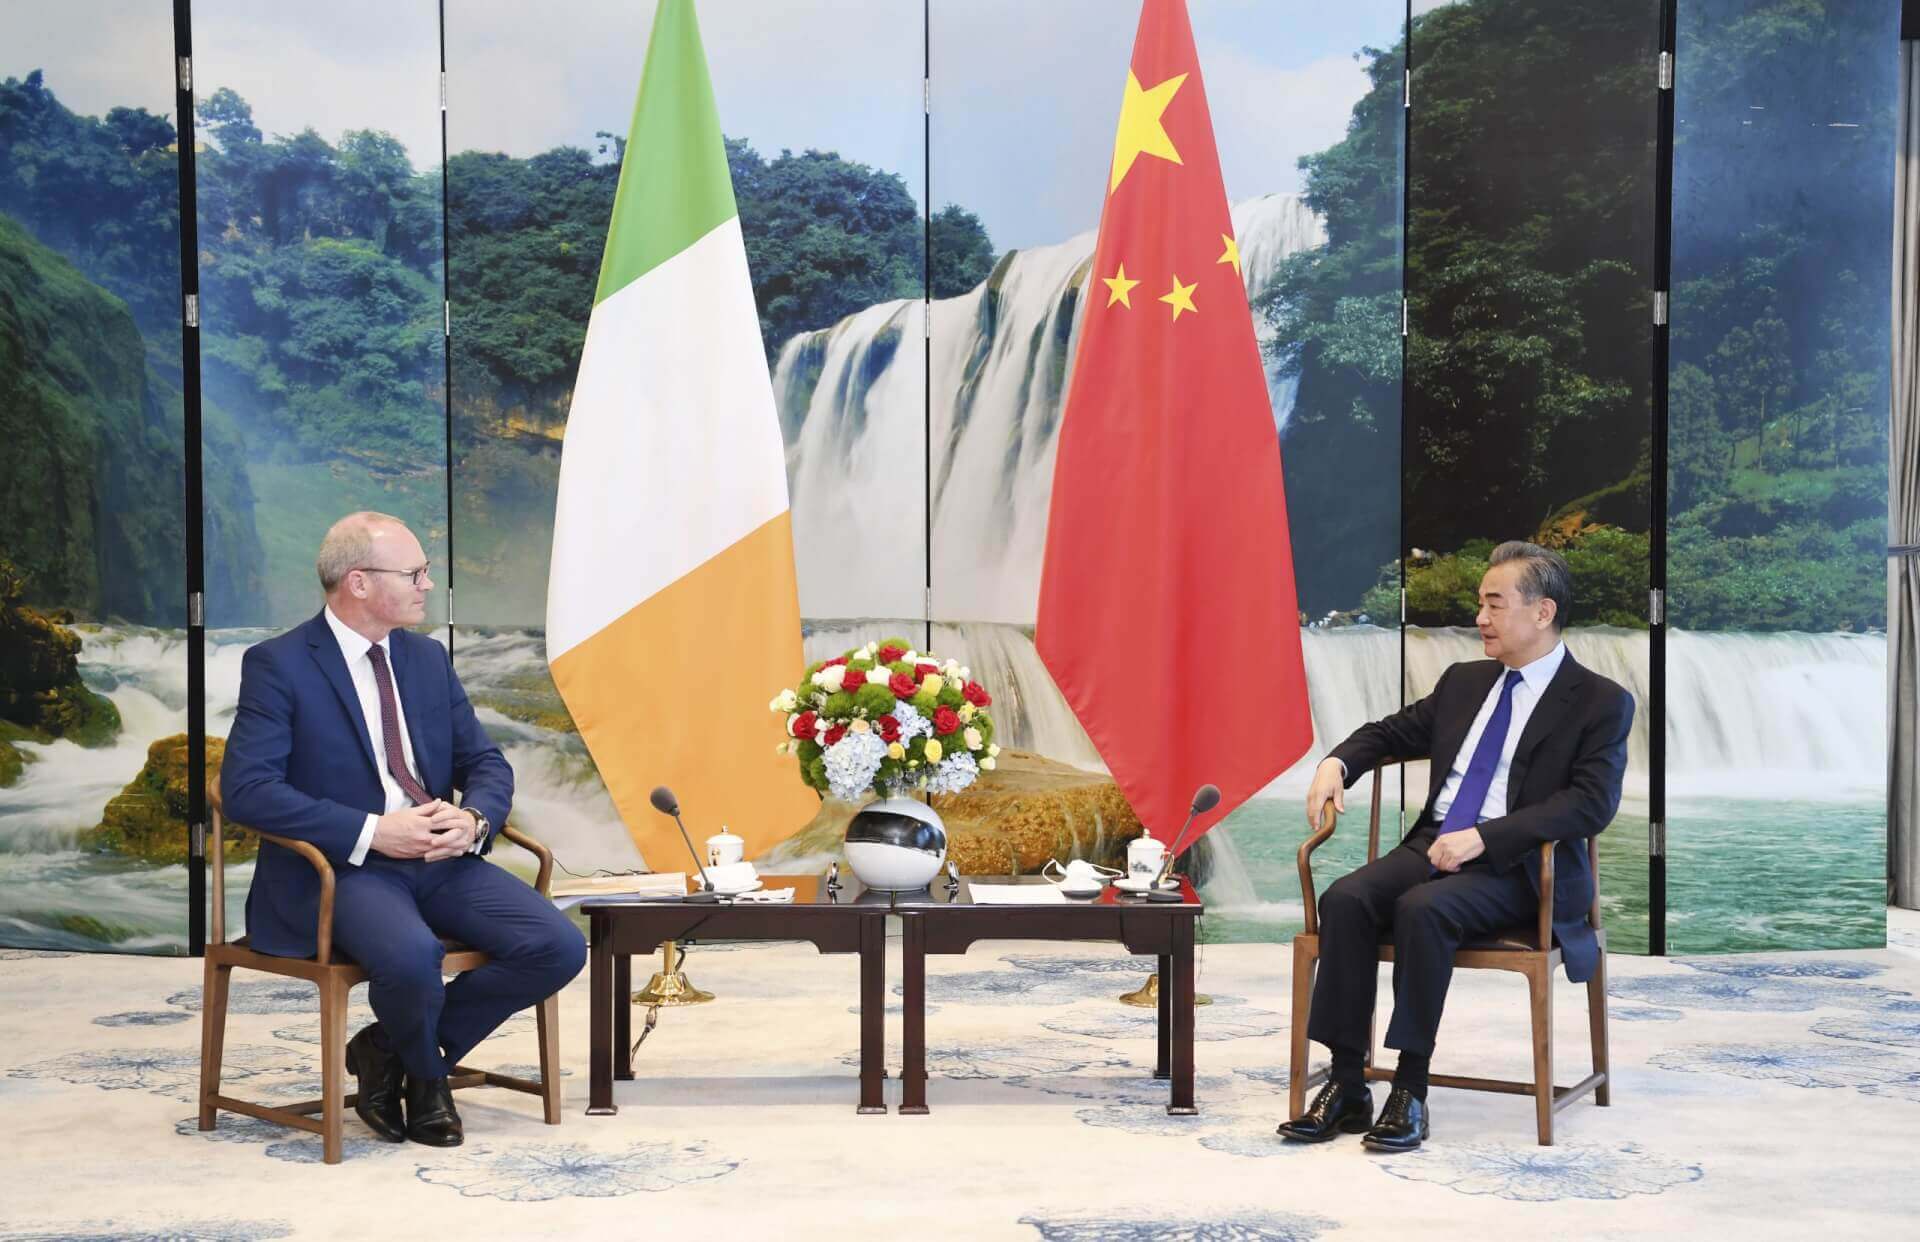 Chinese Diplomacy: Weekly Round-Up (28 May - 4 June, 2021)